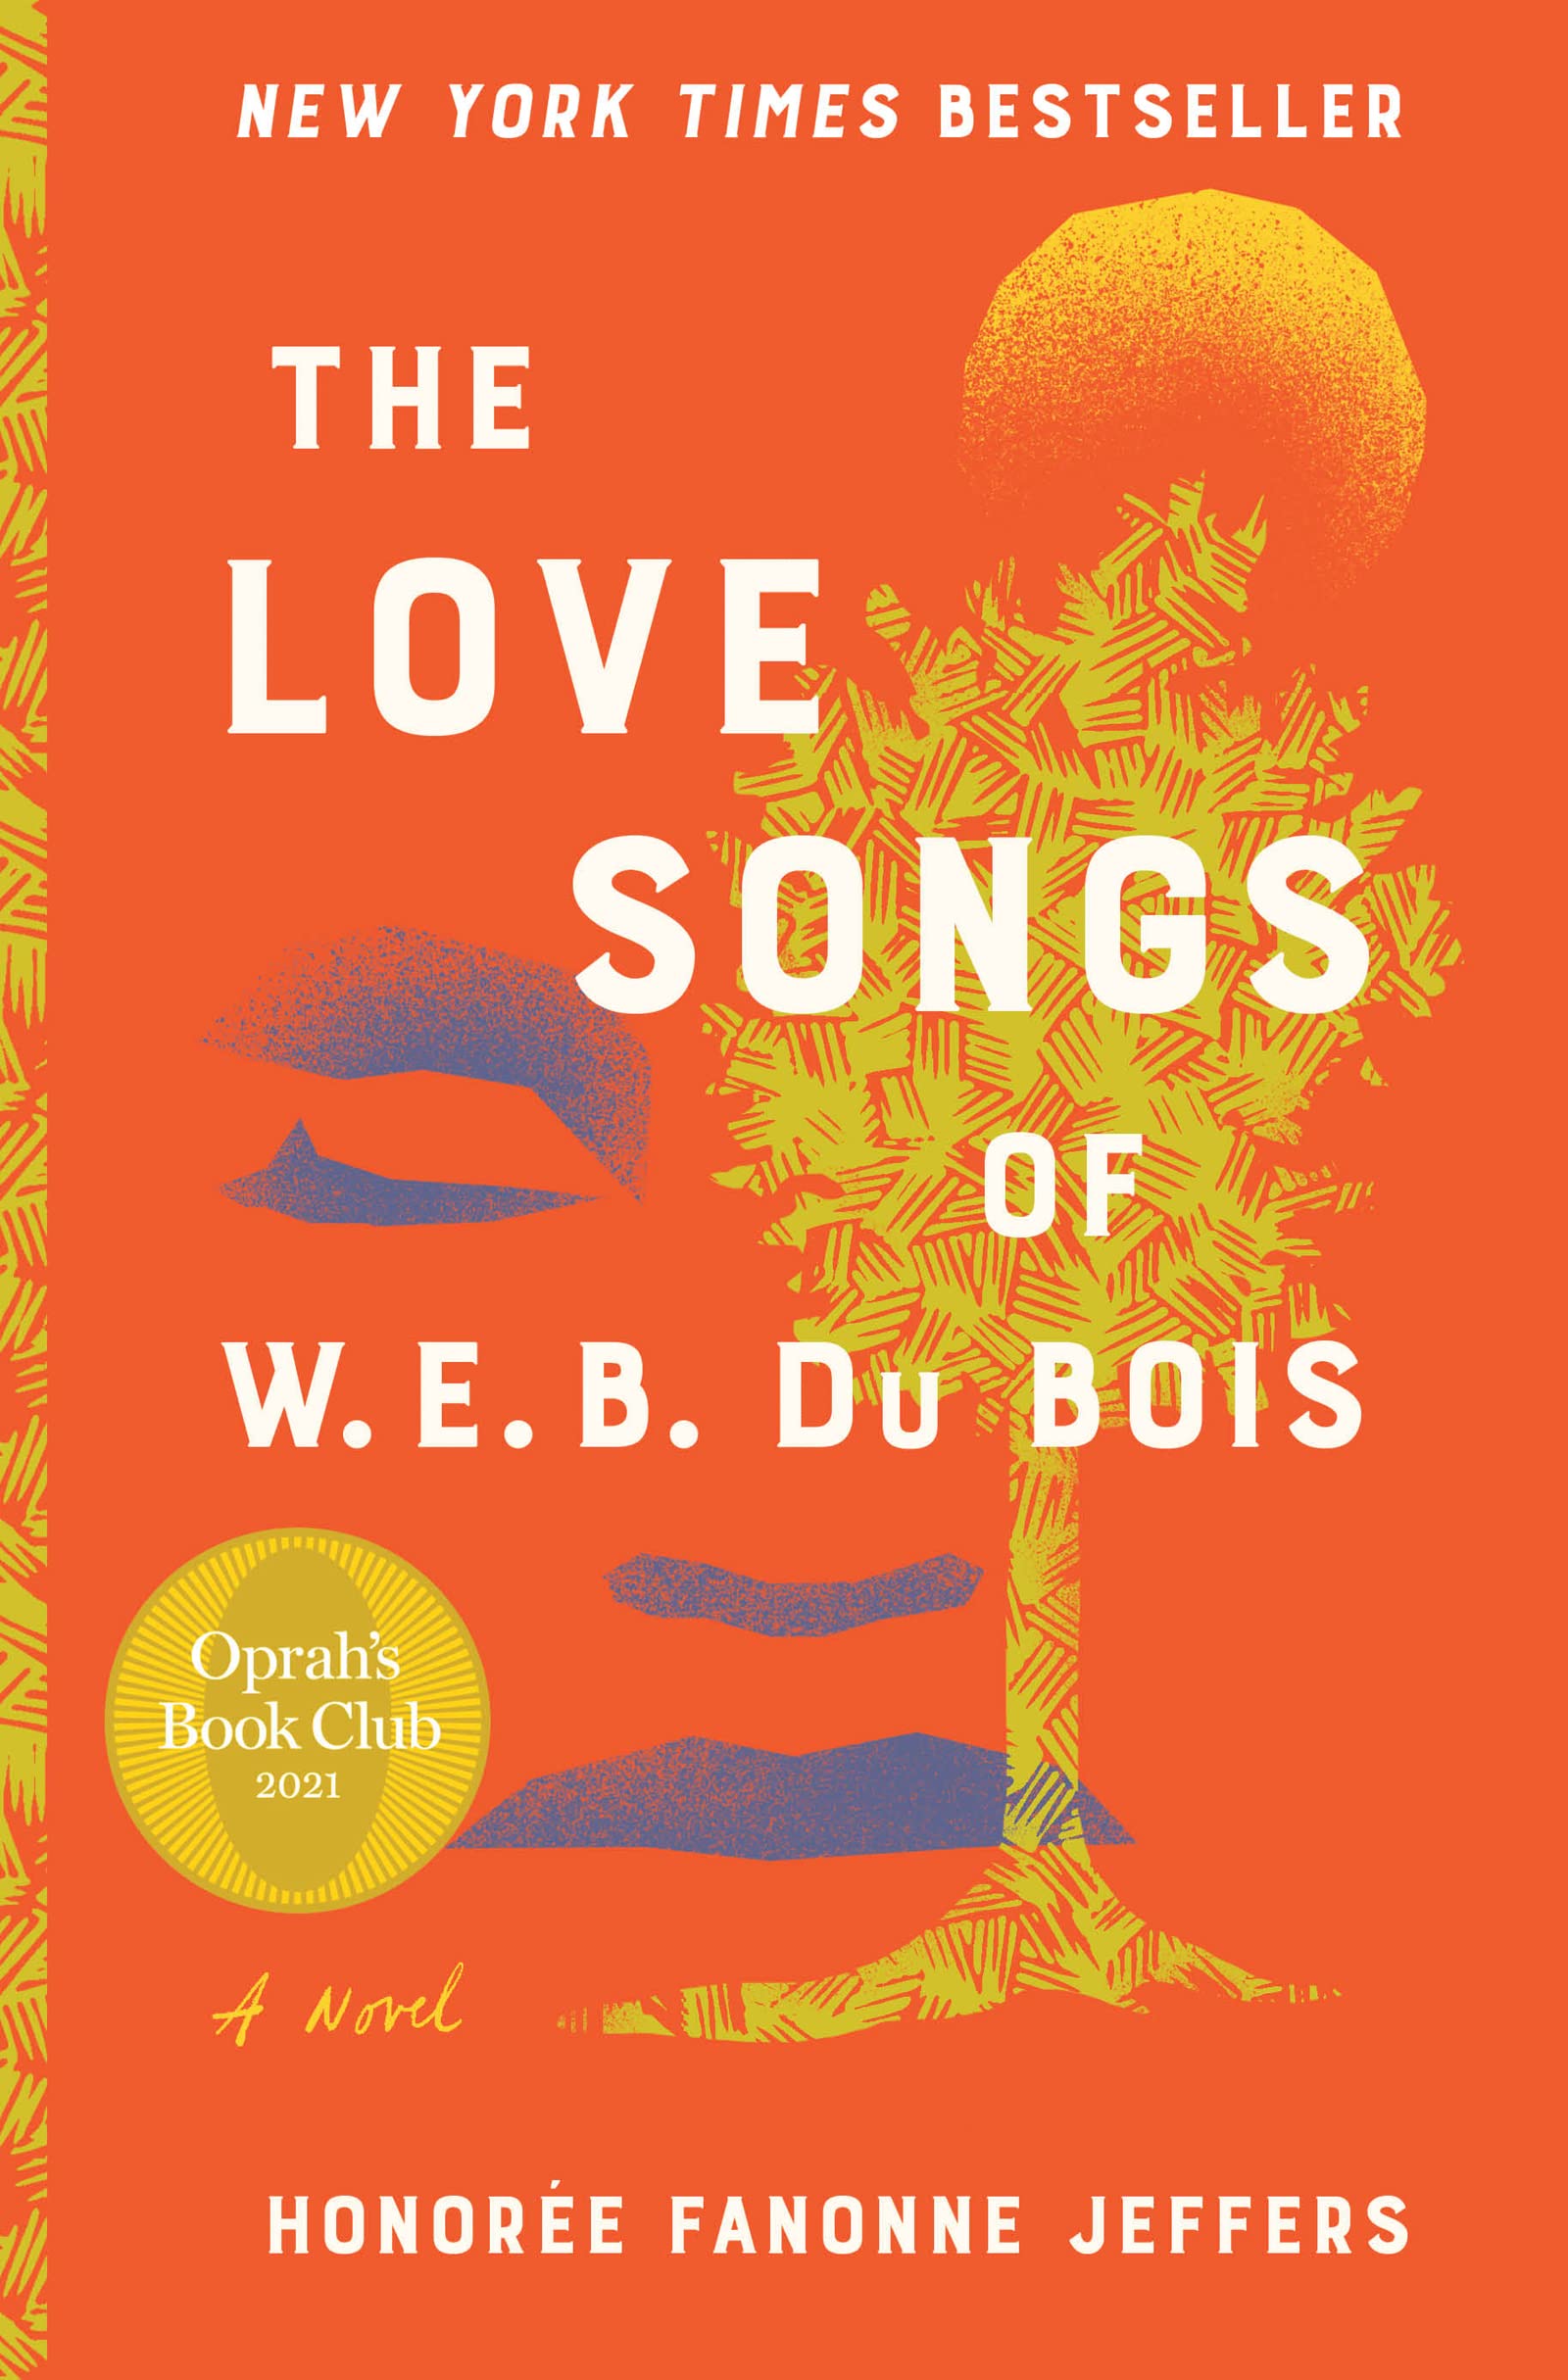 book cover of the love songs of W.E.B. du bois